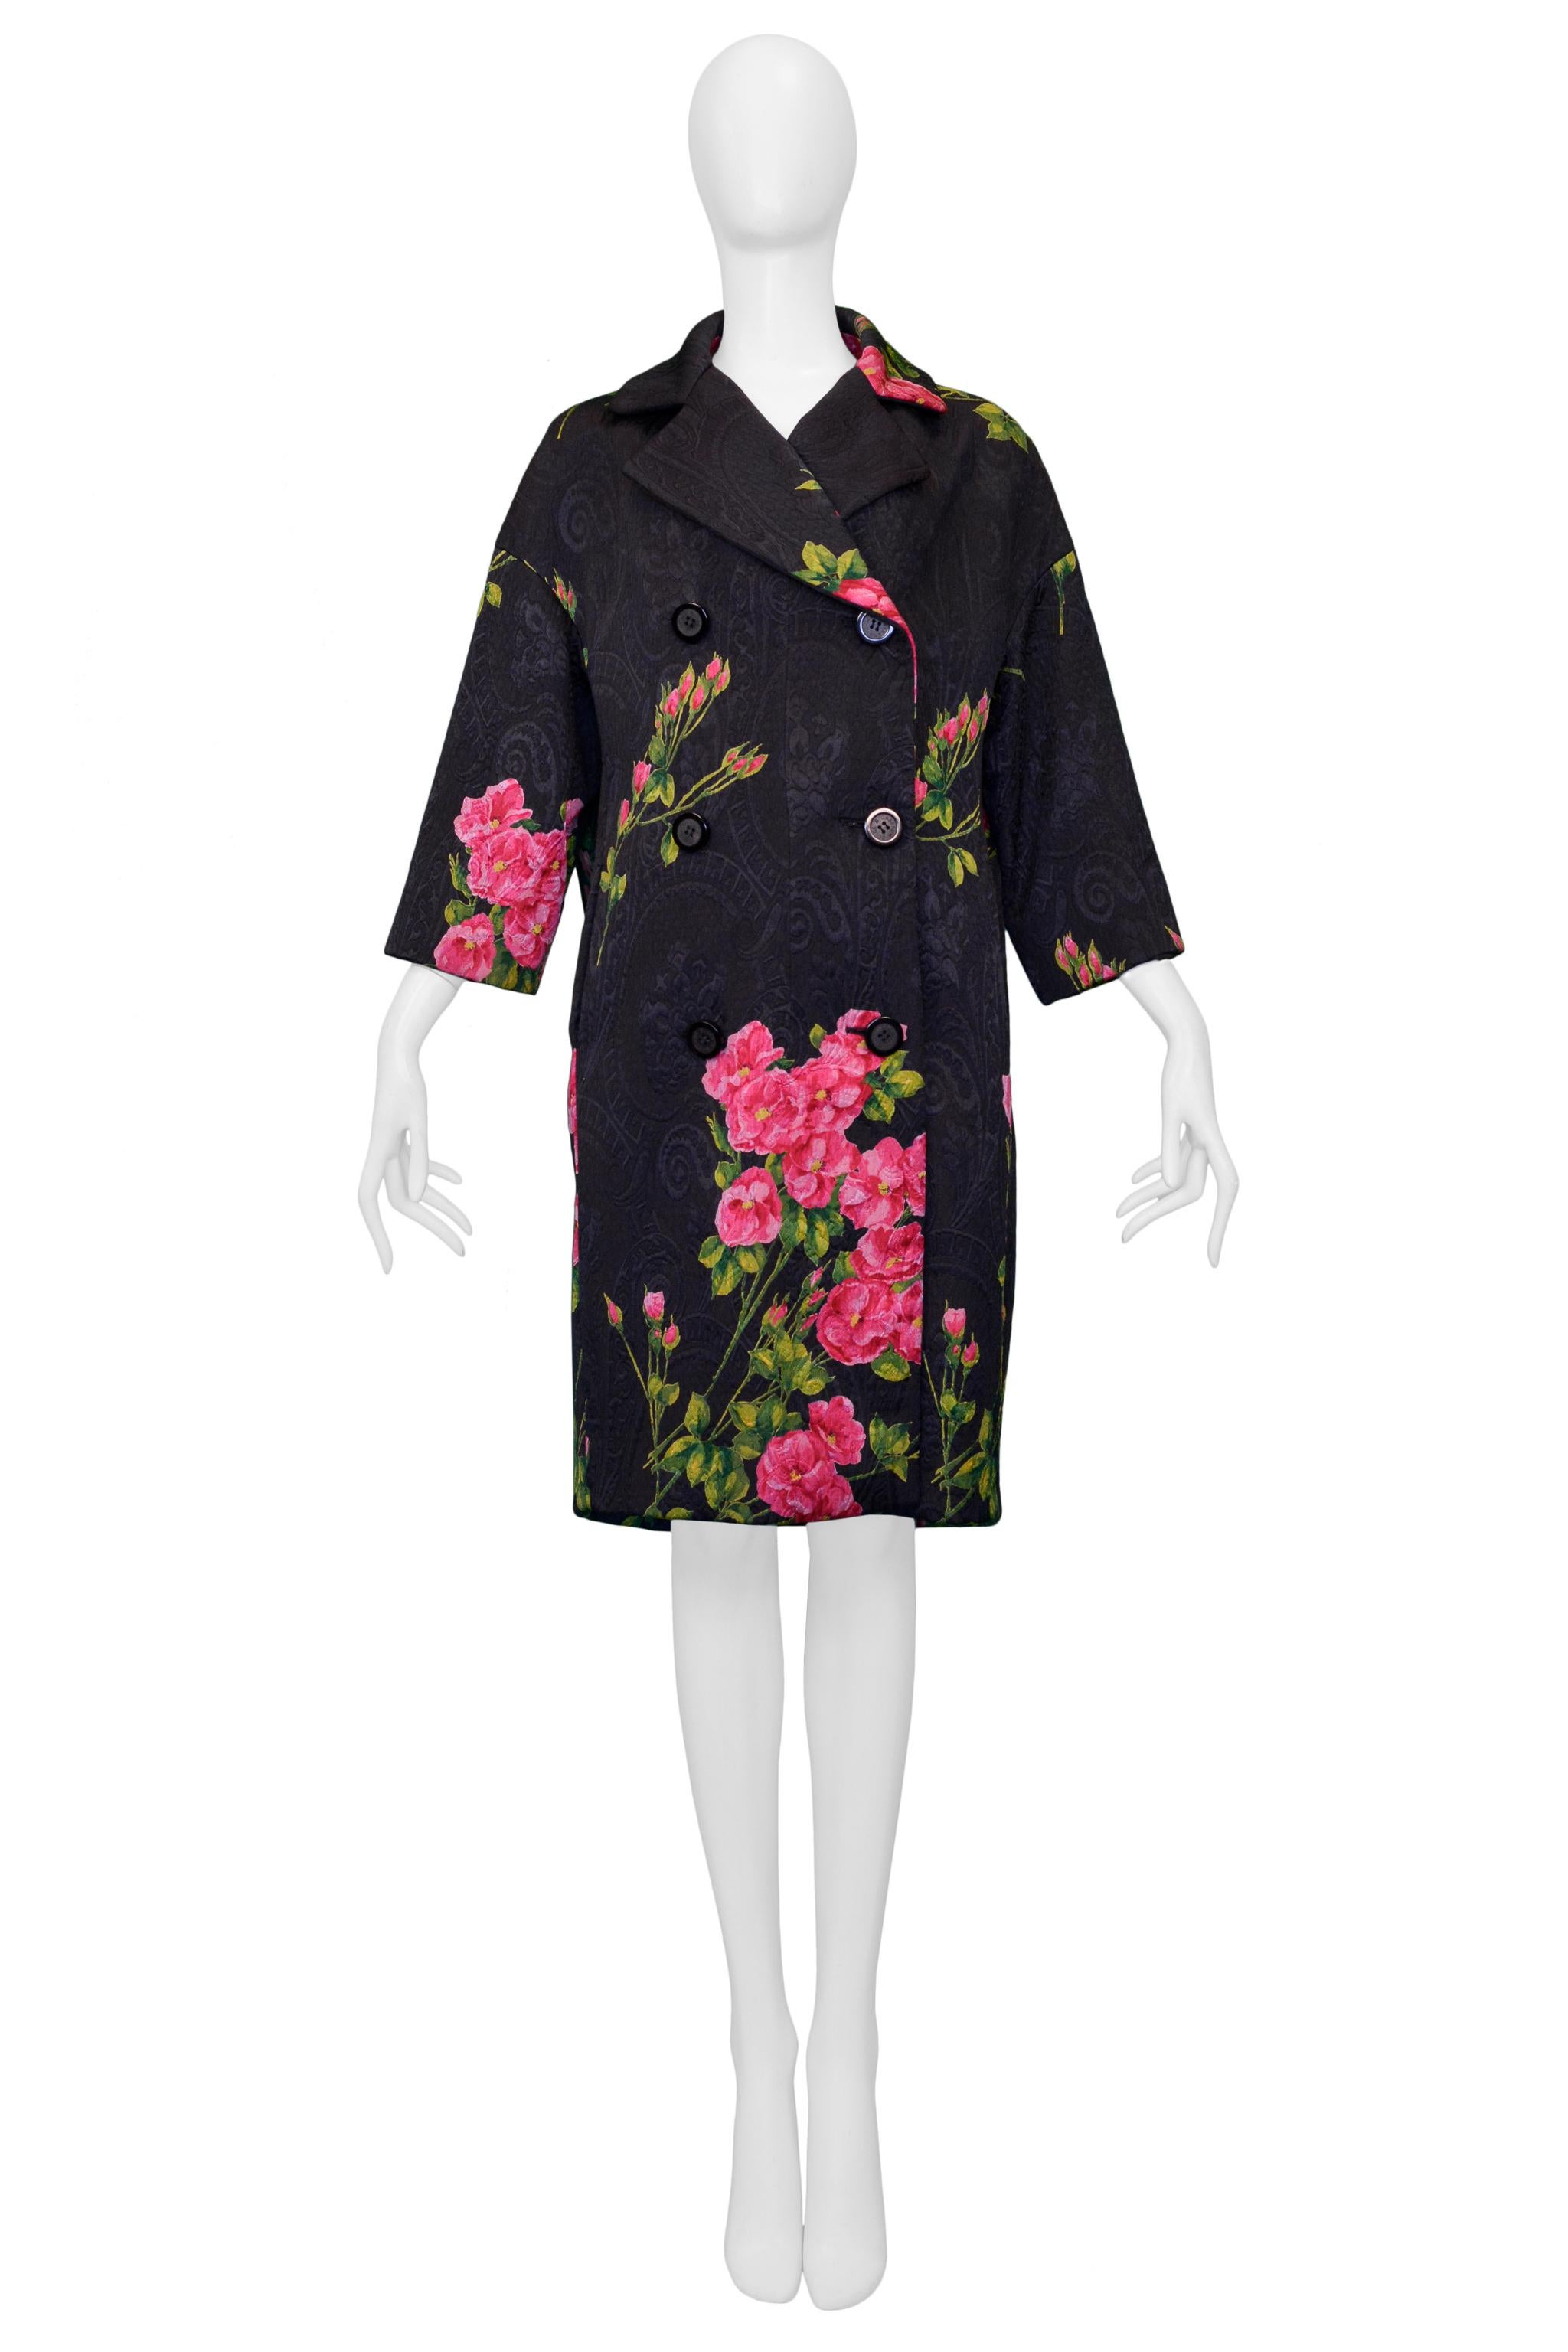 Resurrection Vintage is excited to present a vintage Dolce and Gabbana black evening coat featuring a stunning floral print, floral jacquard texture, black buttons, double-breasted body, 3/4 sleeves, and cocktail knee-length. 

Dolce & Gabbana
Size: